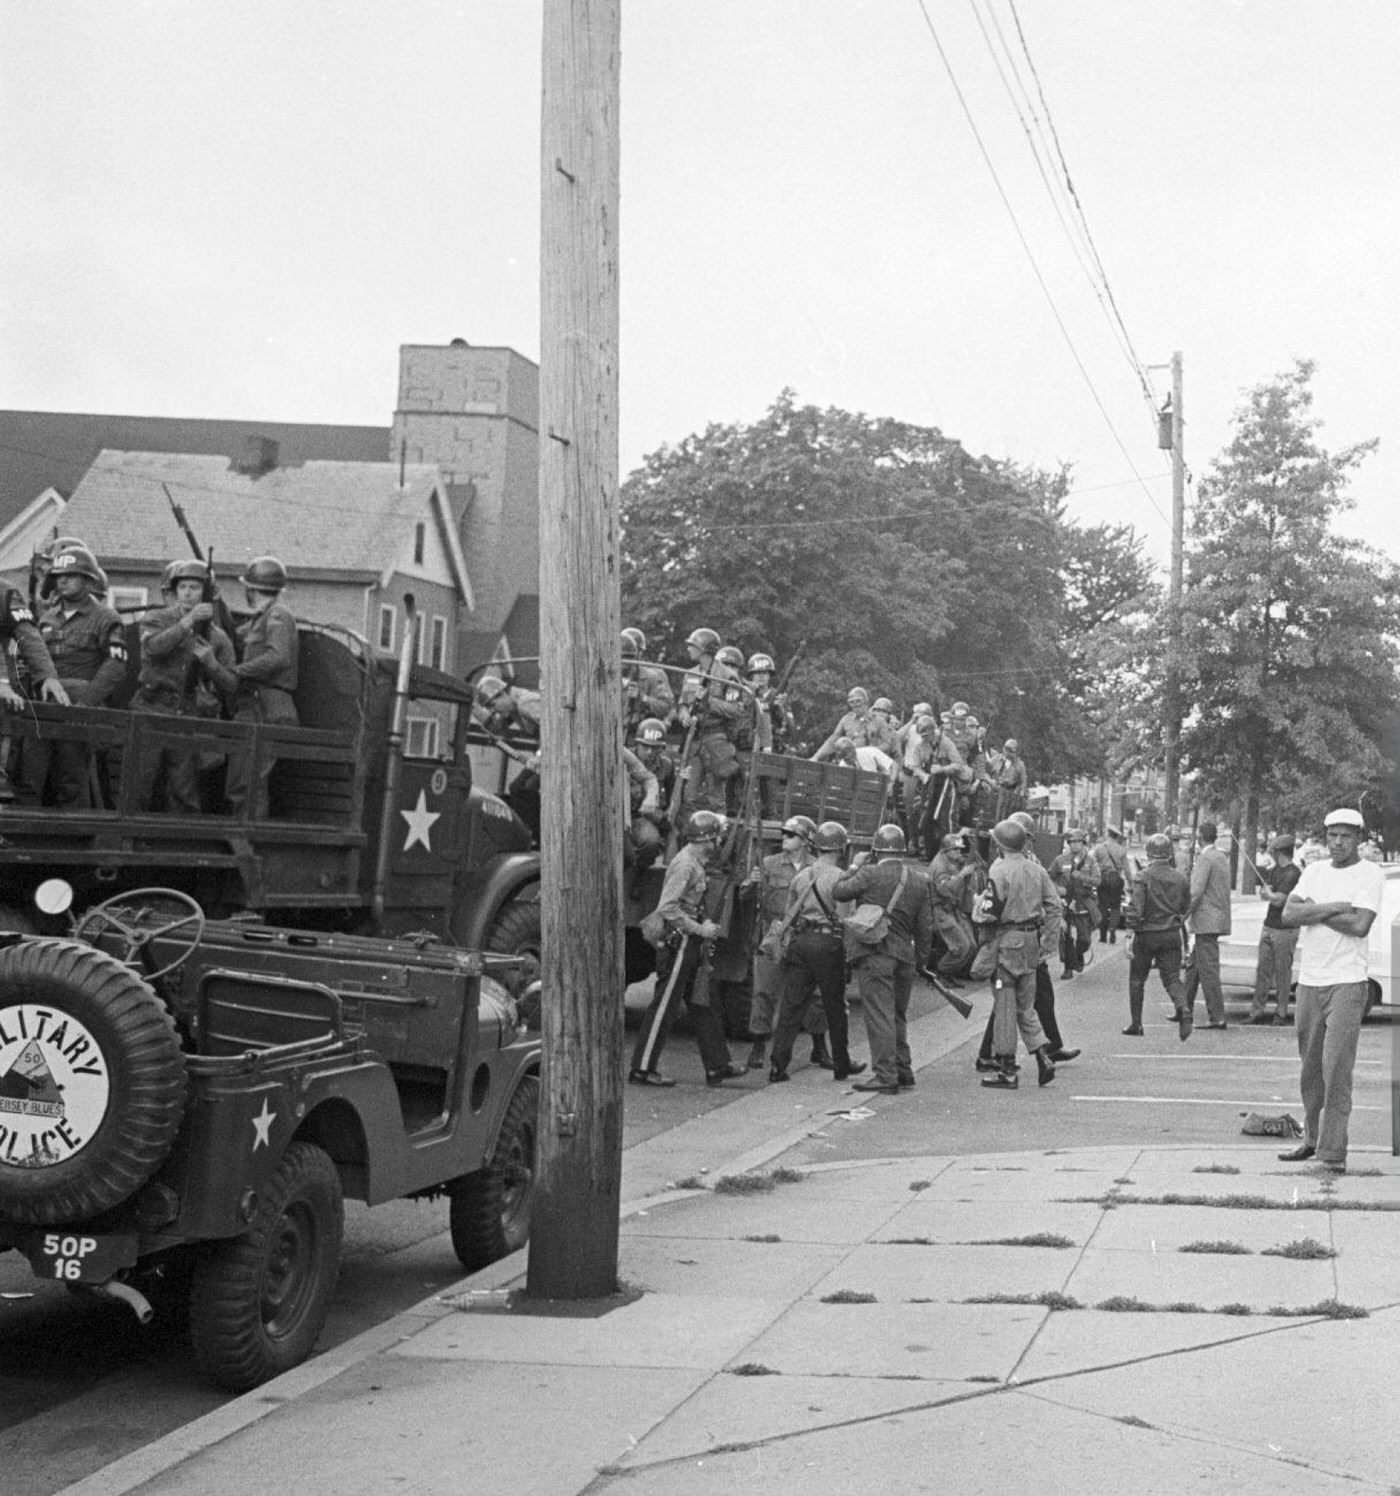 Military jeeps and trucks occupied by soldiers of the federal guard on an avenue